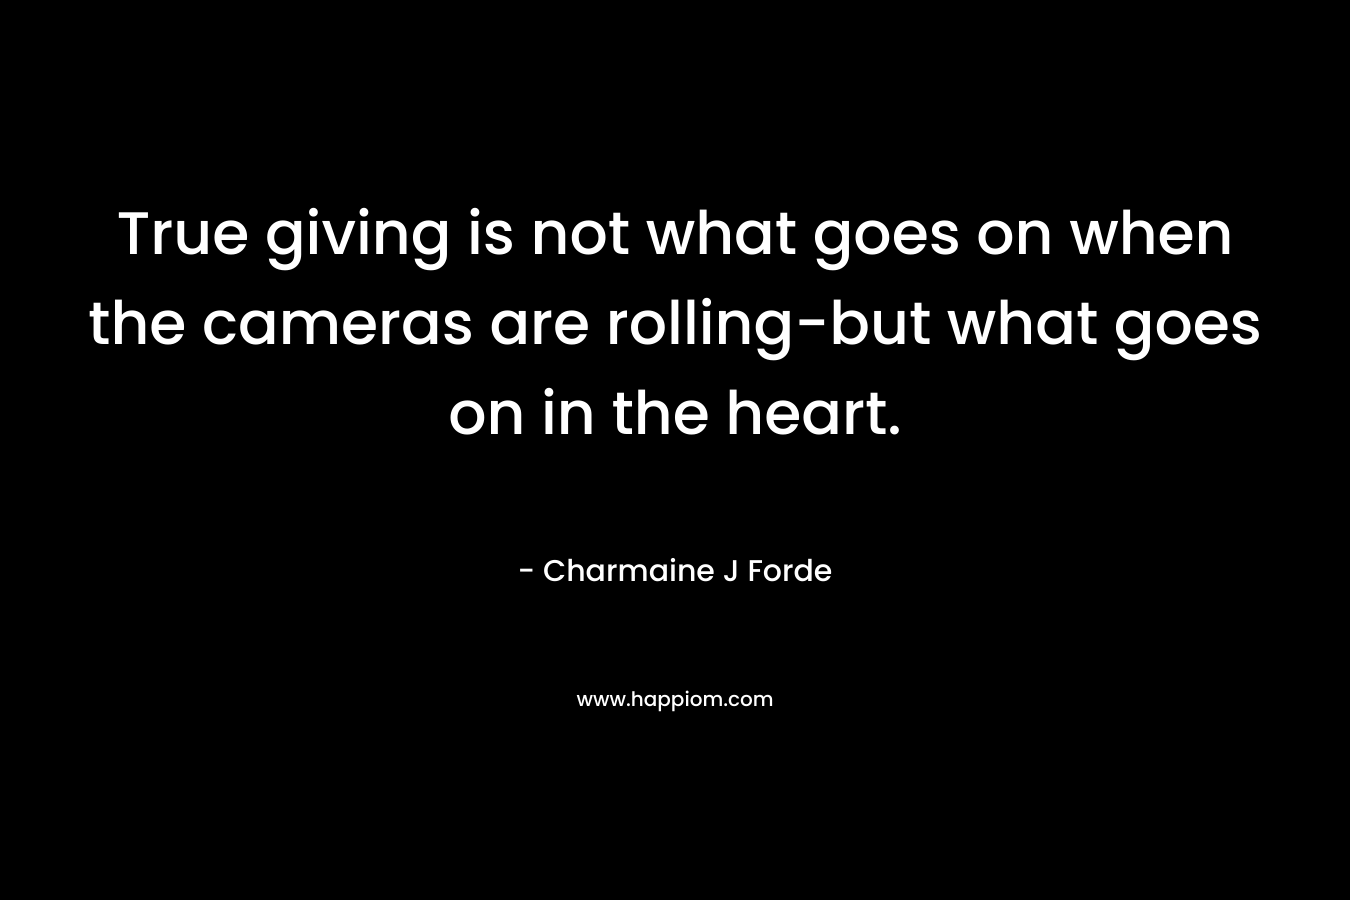 True giving is not what goes on when the cameras are rolling-but what goes on in the heart.